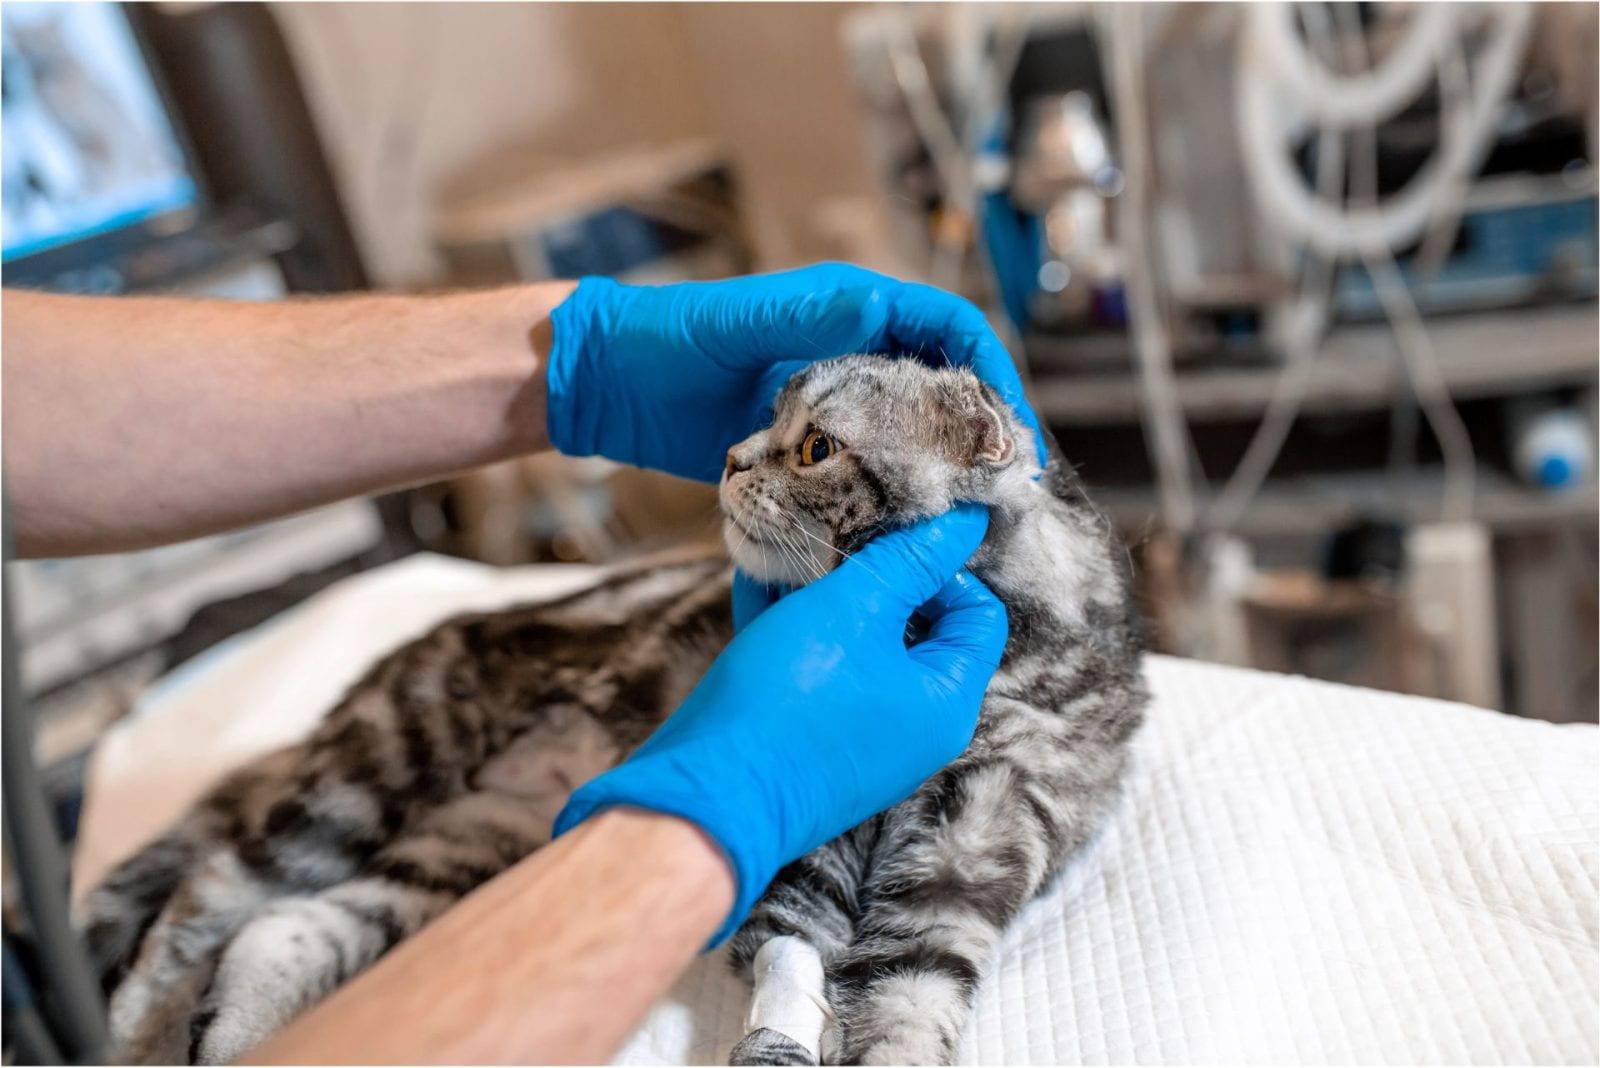 Close up of a cat being examined by someone wearing blue exam gloves